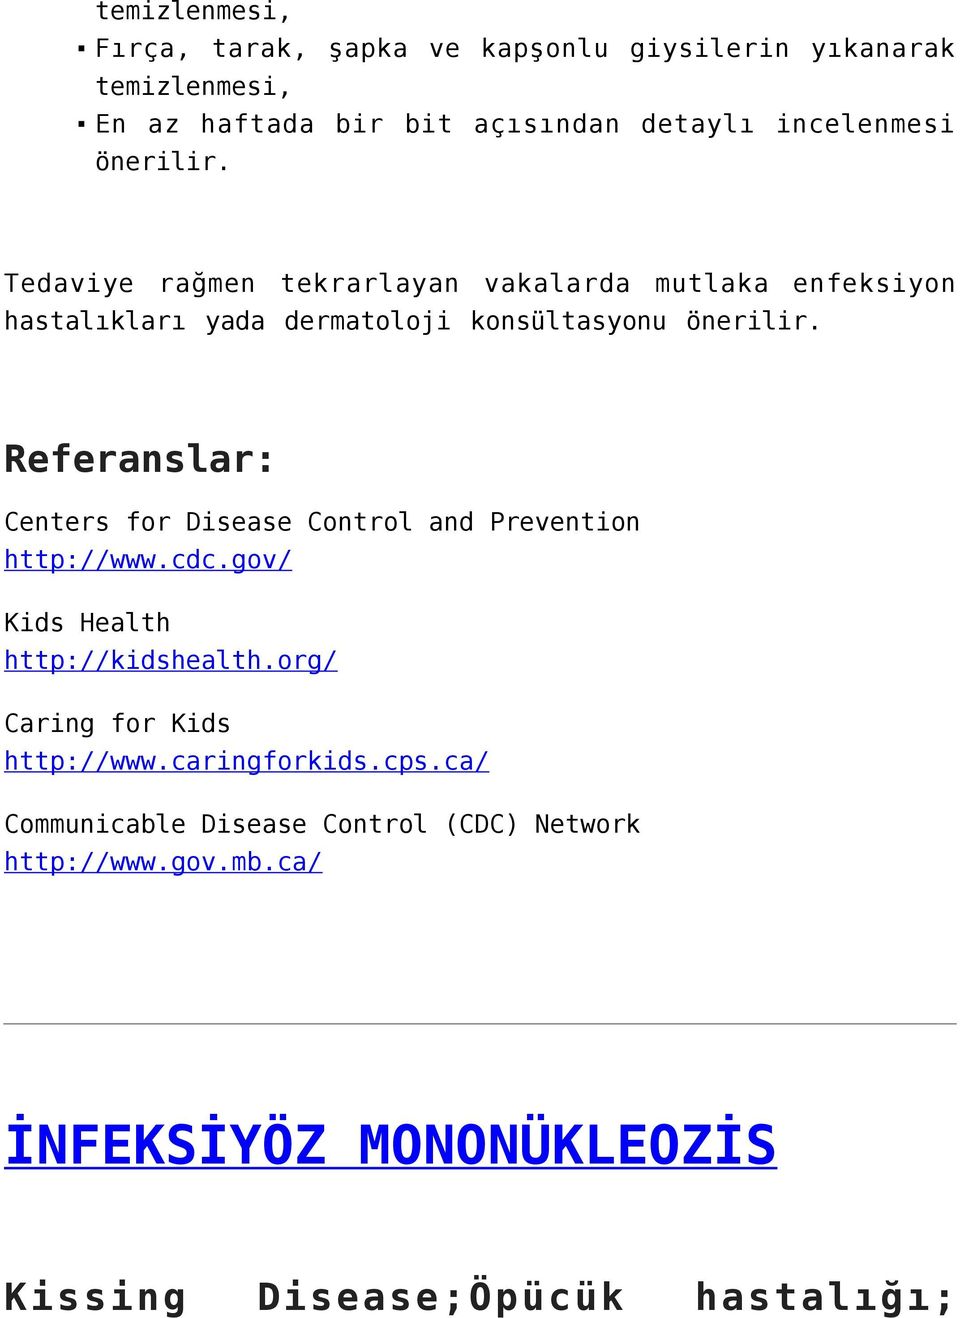 Referanslar: Centers for Disease Control and Prevention http://www.cdc.gov/ Kids Health http://kidshealth.